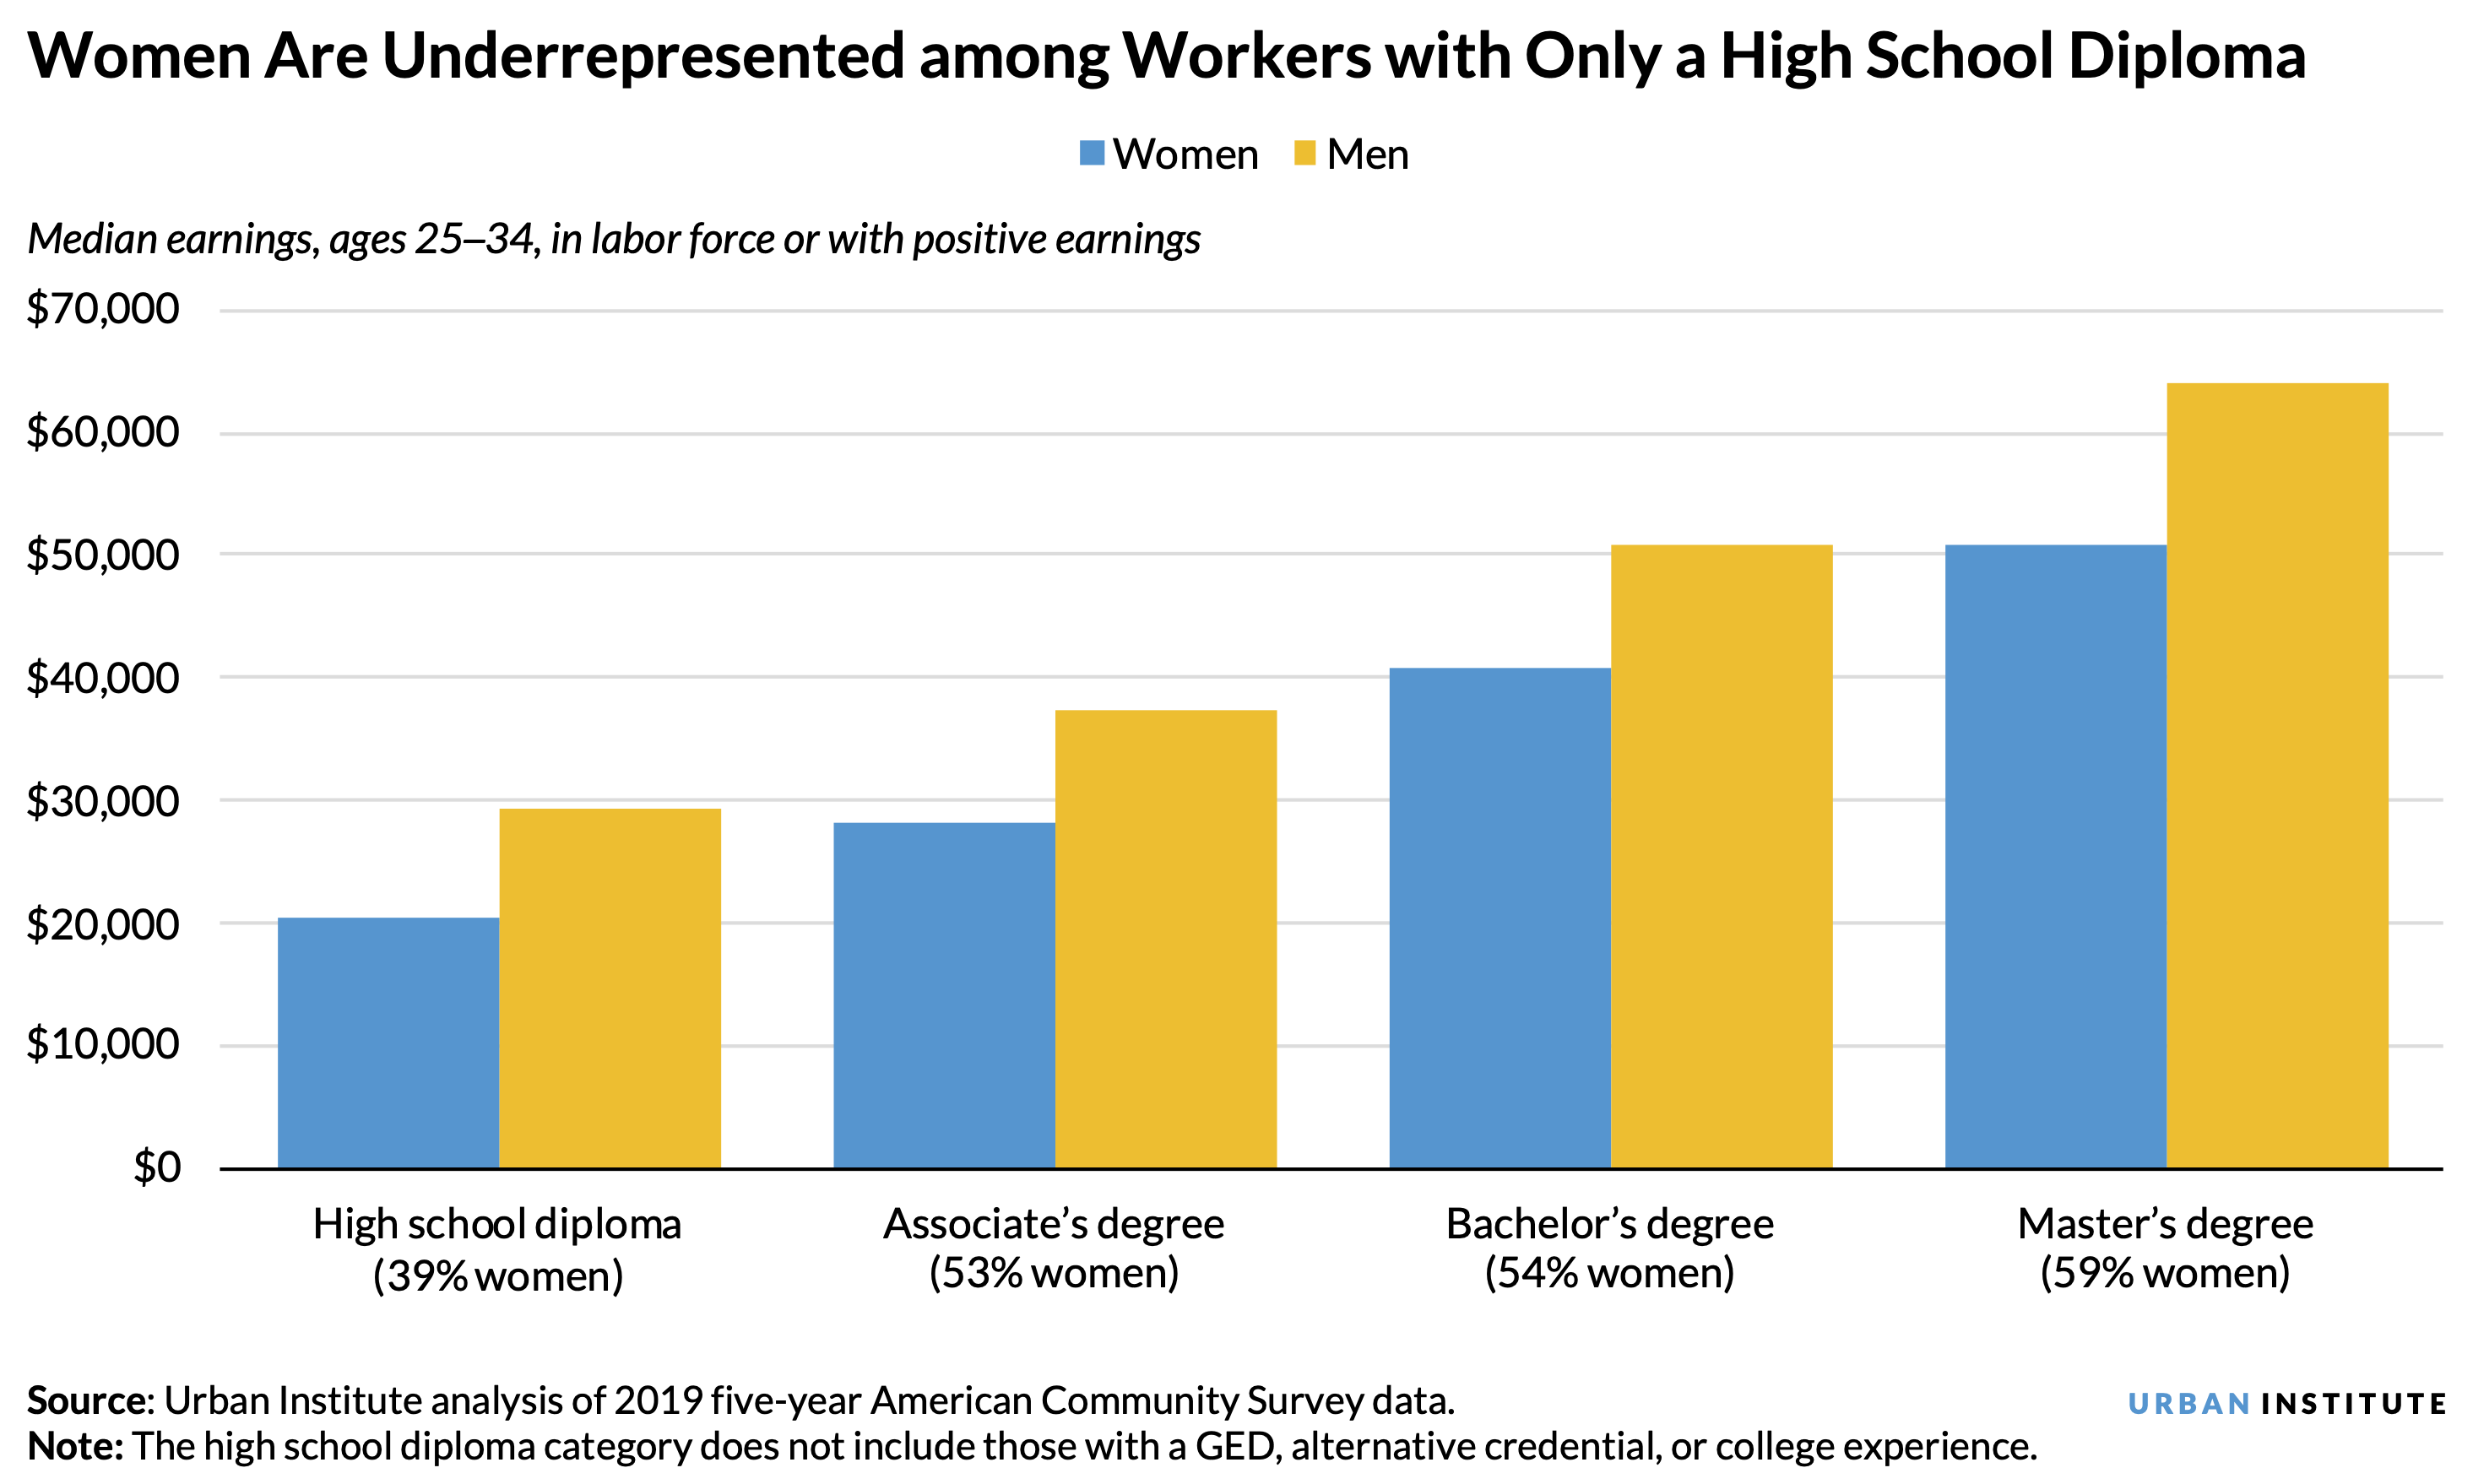 A bar chart showing that men earn more at every level of education and that women are underrepresented among workers with only a high school diploma.